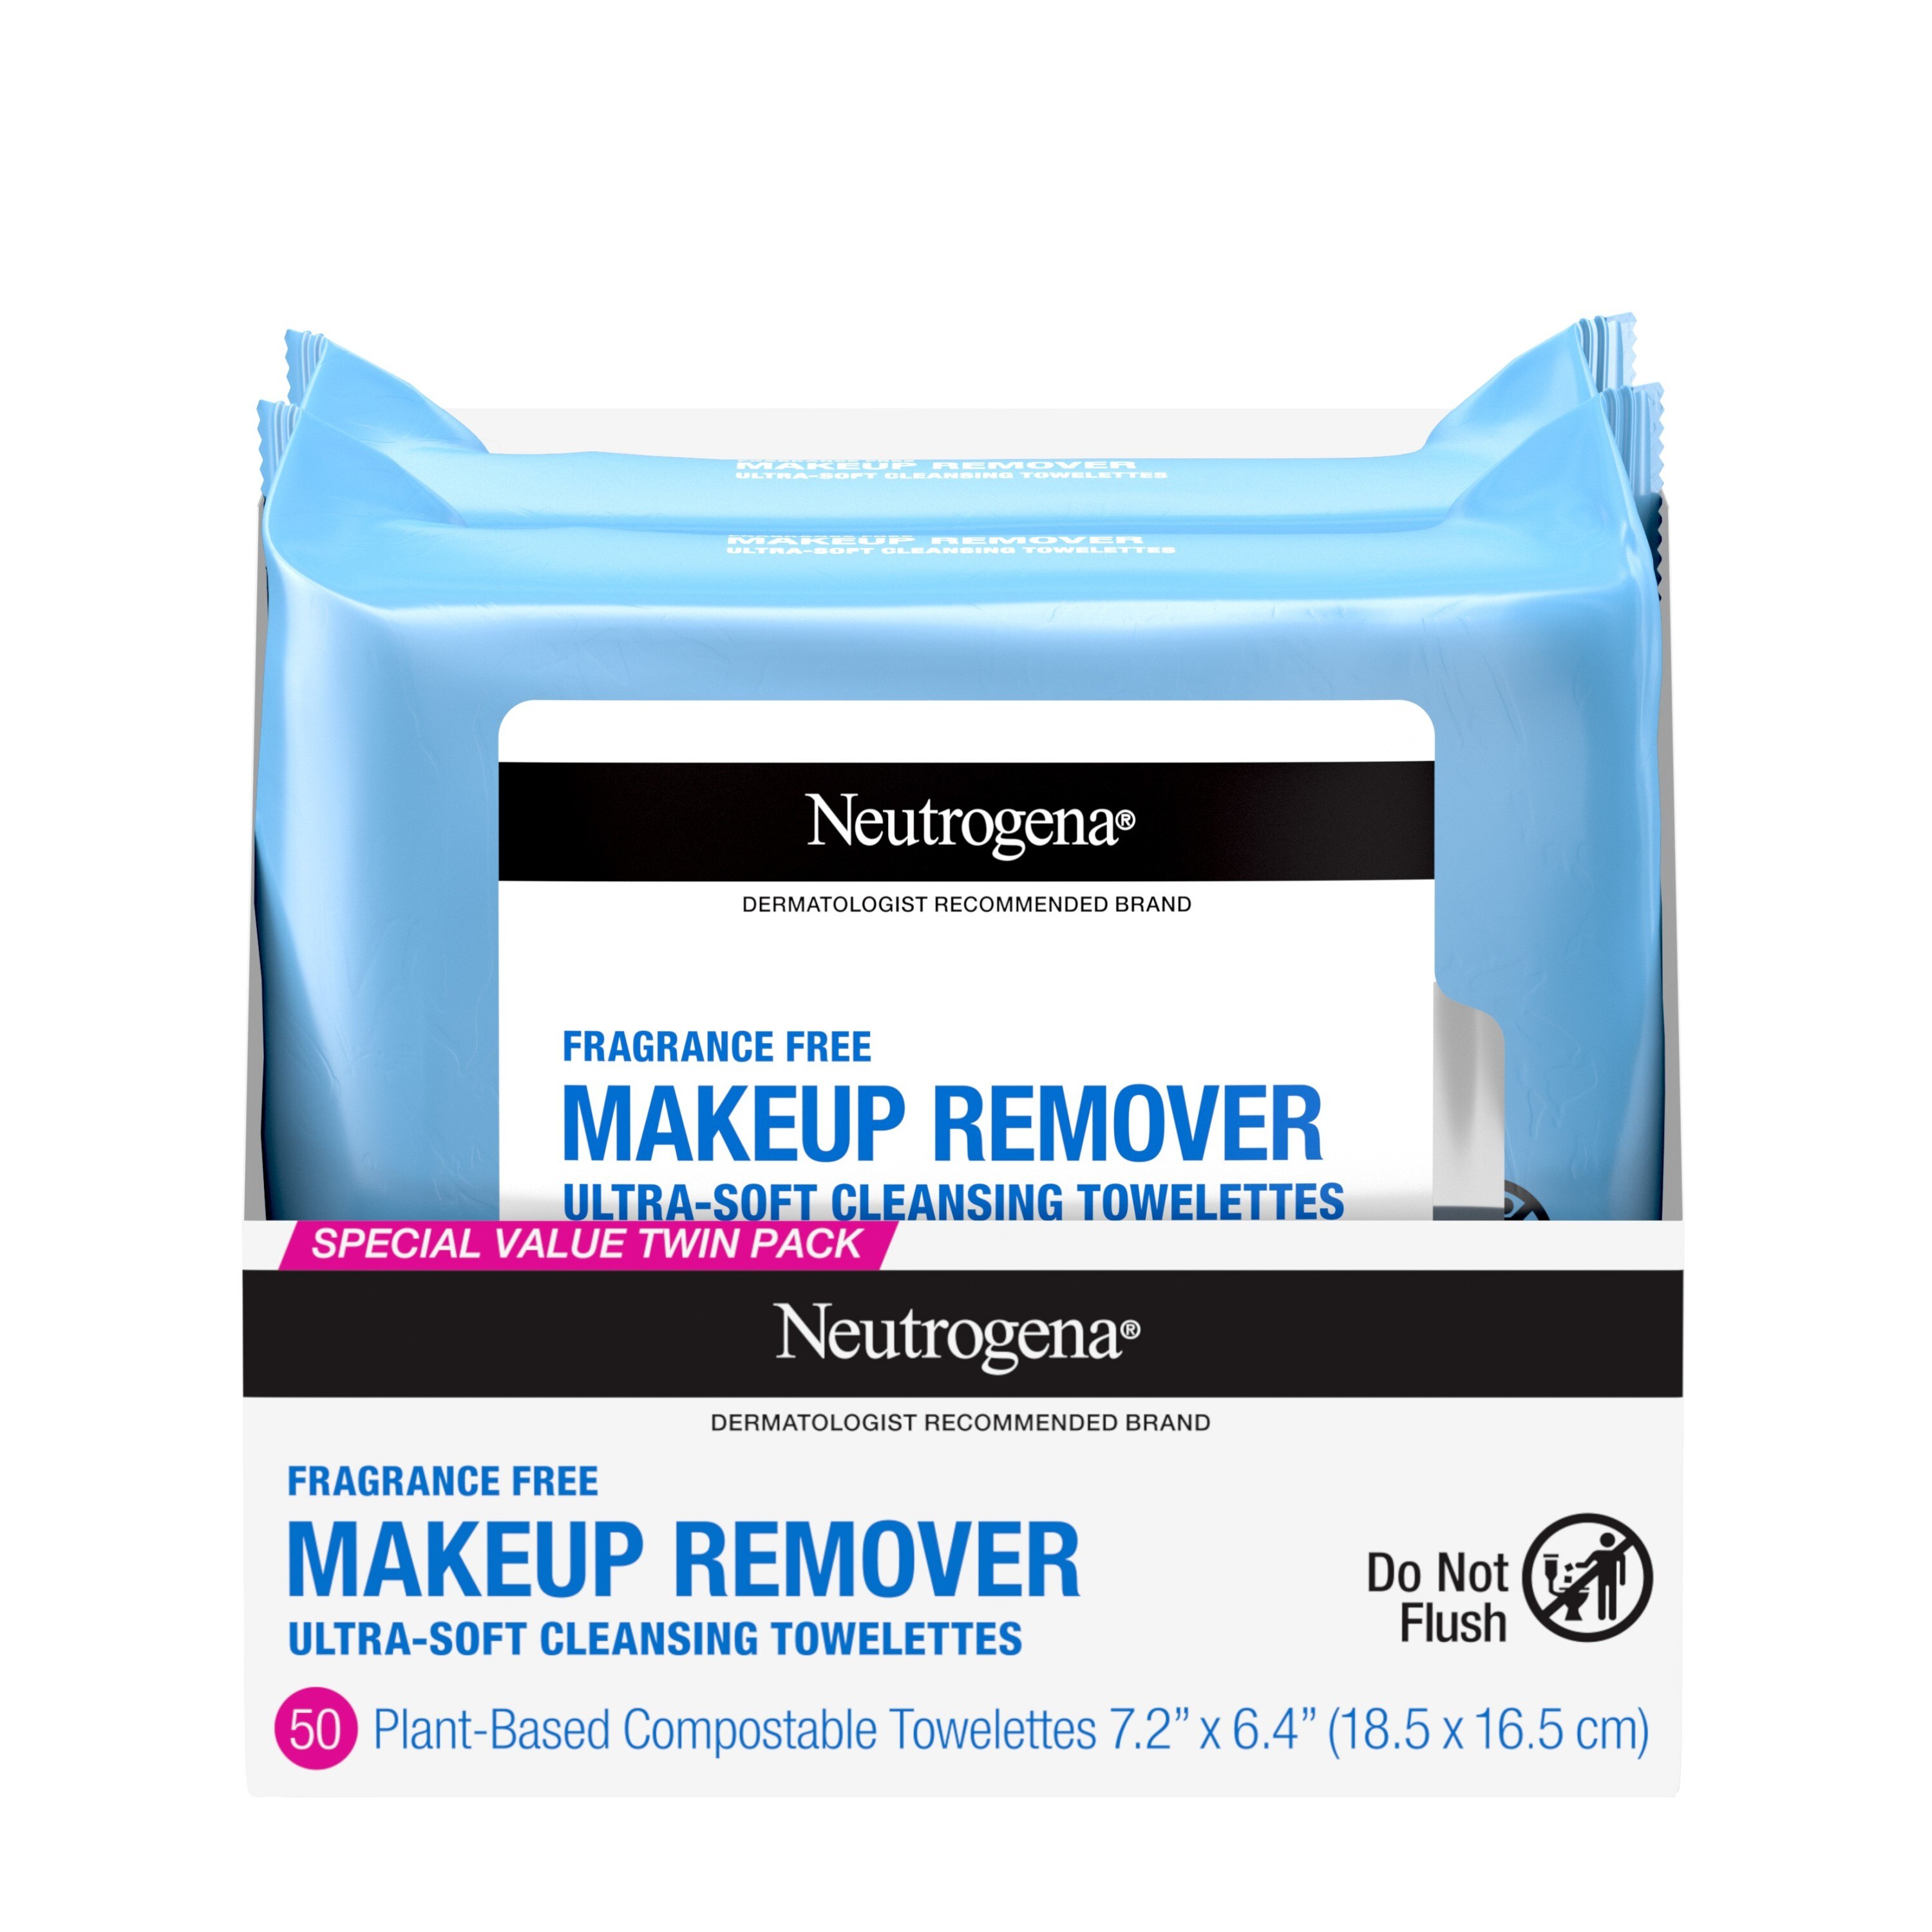 Neutrogena Fragrance Free Makeup Remover Facial Wipes, Twin Pack, 50CT